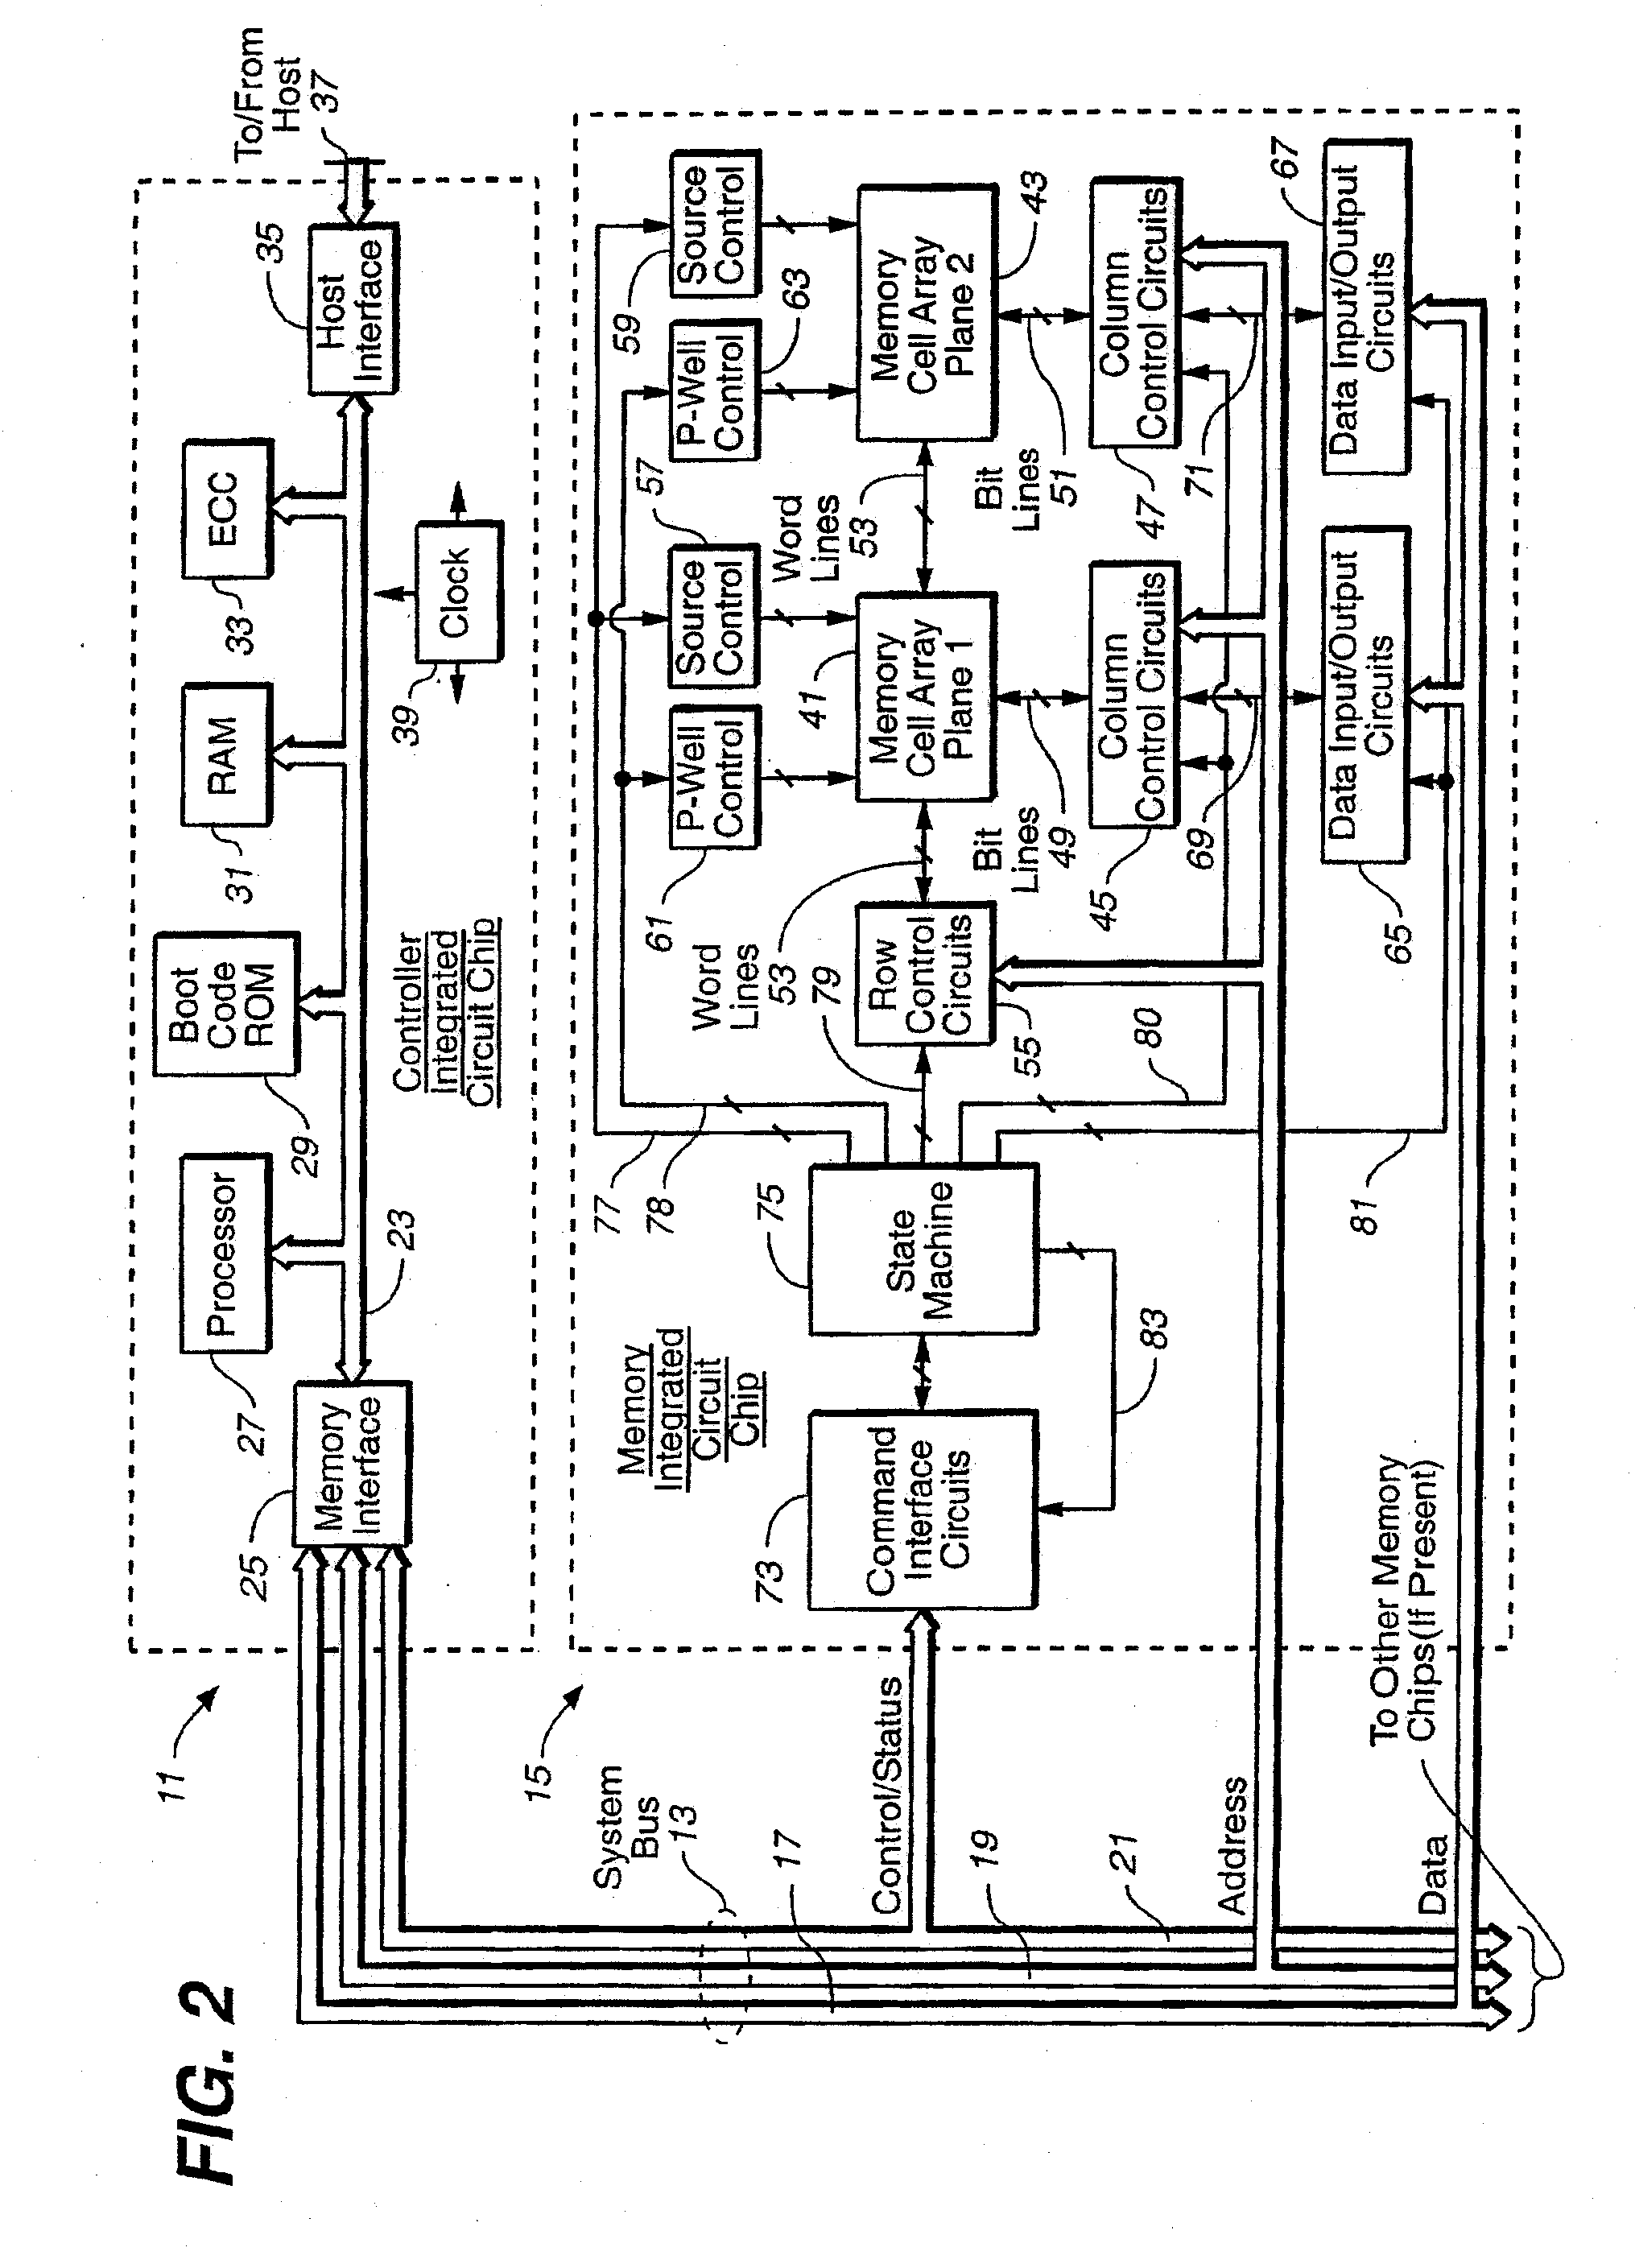 Non-Volatile Memory And Method With Memory Allocation For A Directly Mapped File Storage System